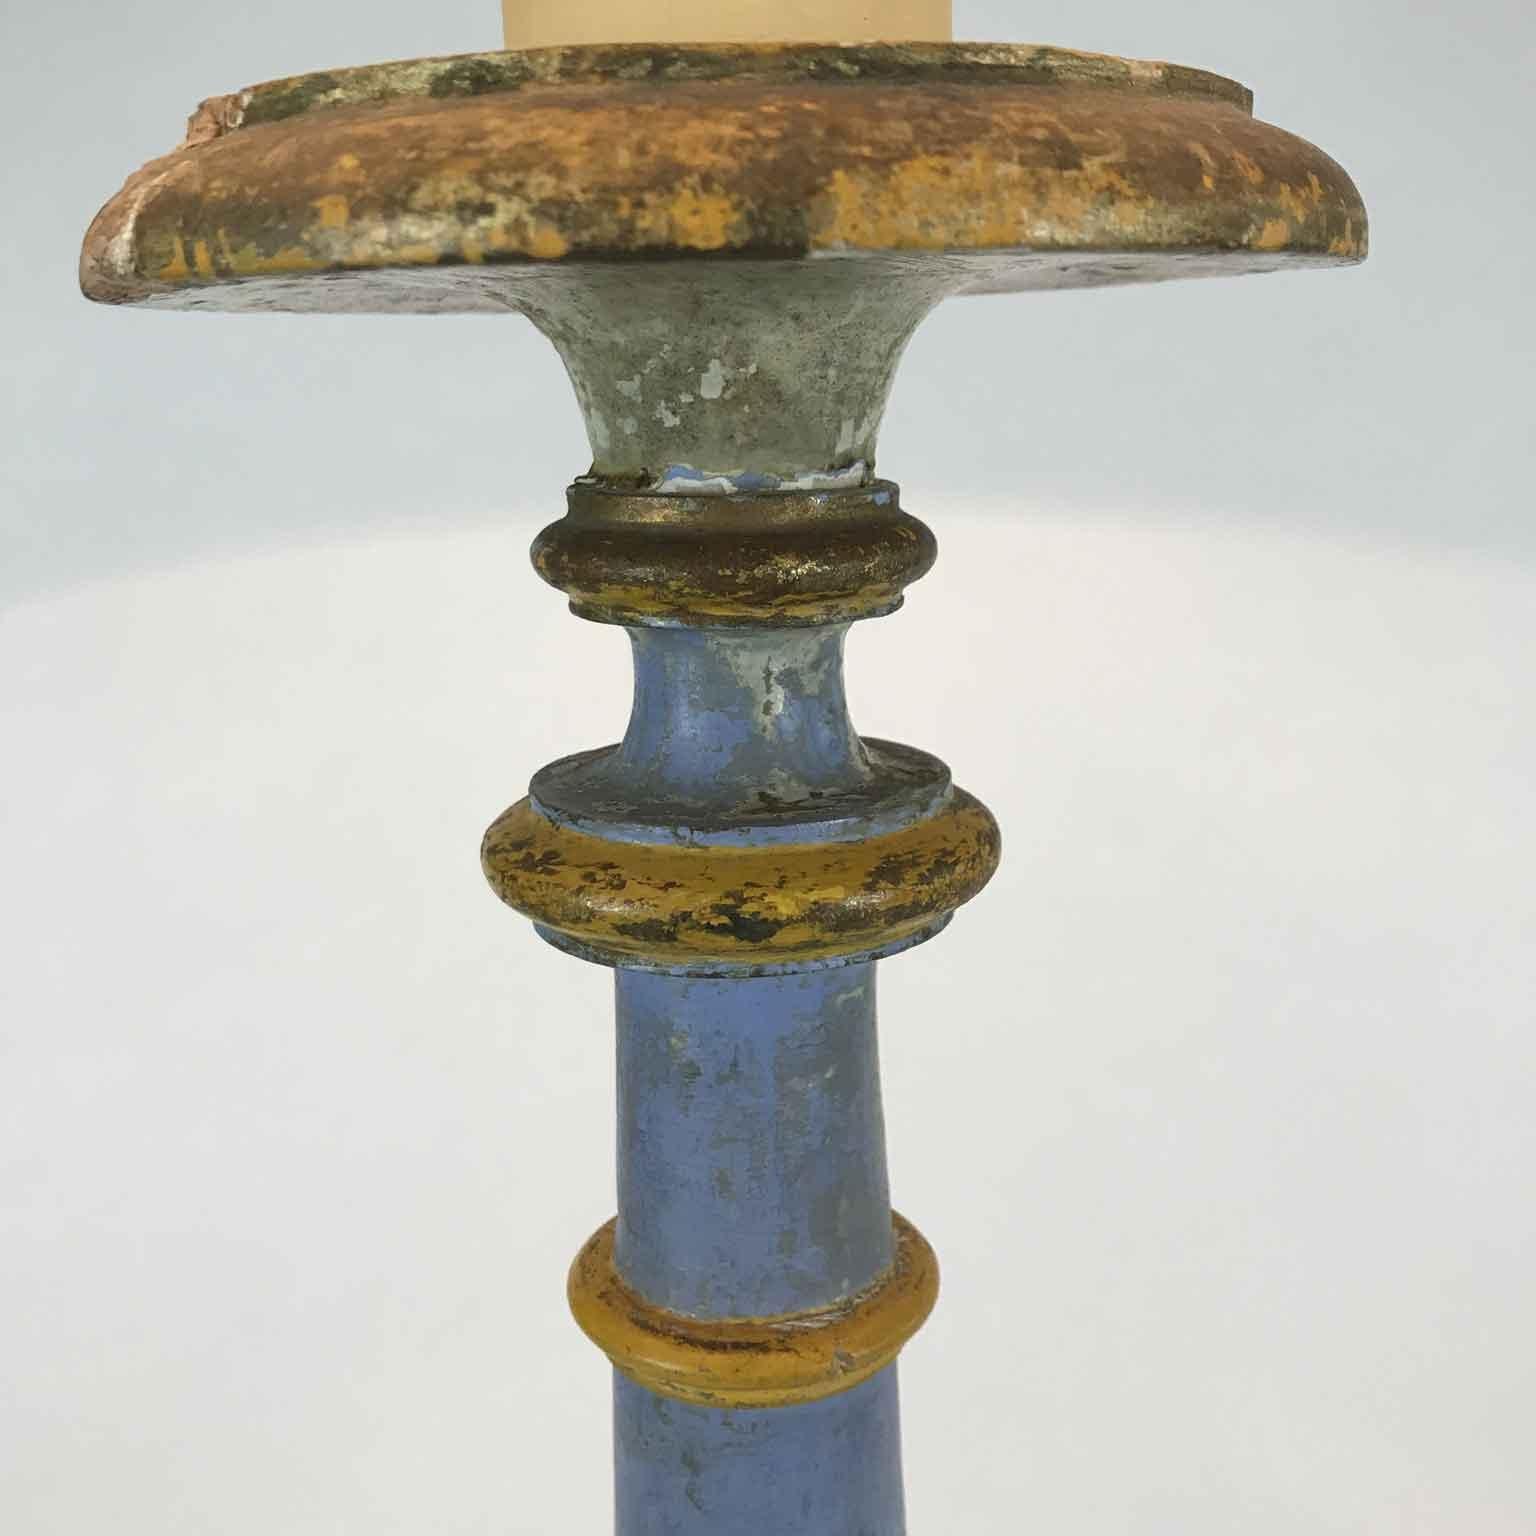 Pair of Italian neoclassical table lamp bases from Tuscany, antique circular Rocchetto candleholders blue and Siena yellow painted pinewood, wired for lamps. White LAMPSHADES are for DISPLAY ONLY, NOT INCLUDED.

The pair of Italian wooden bases